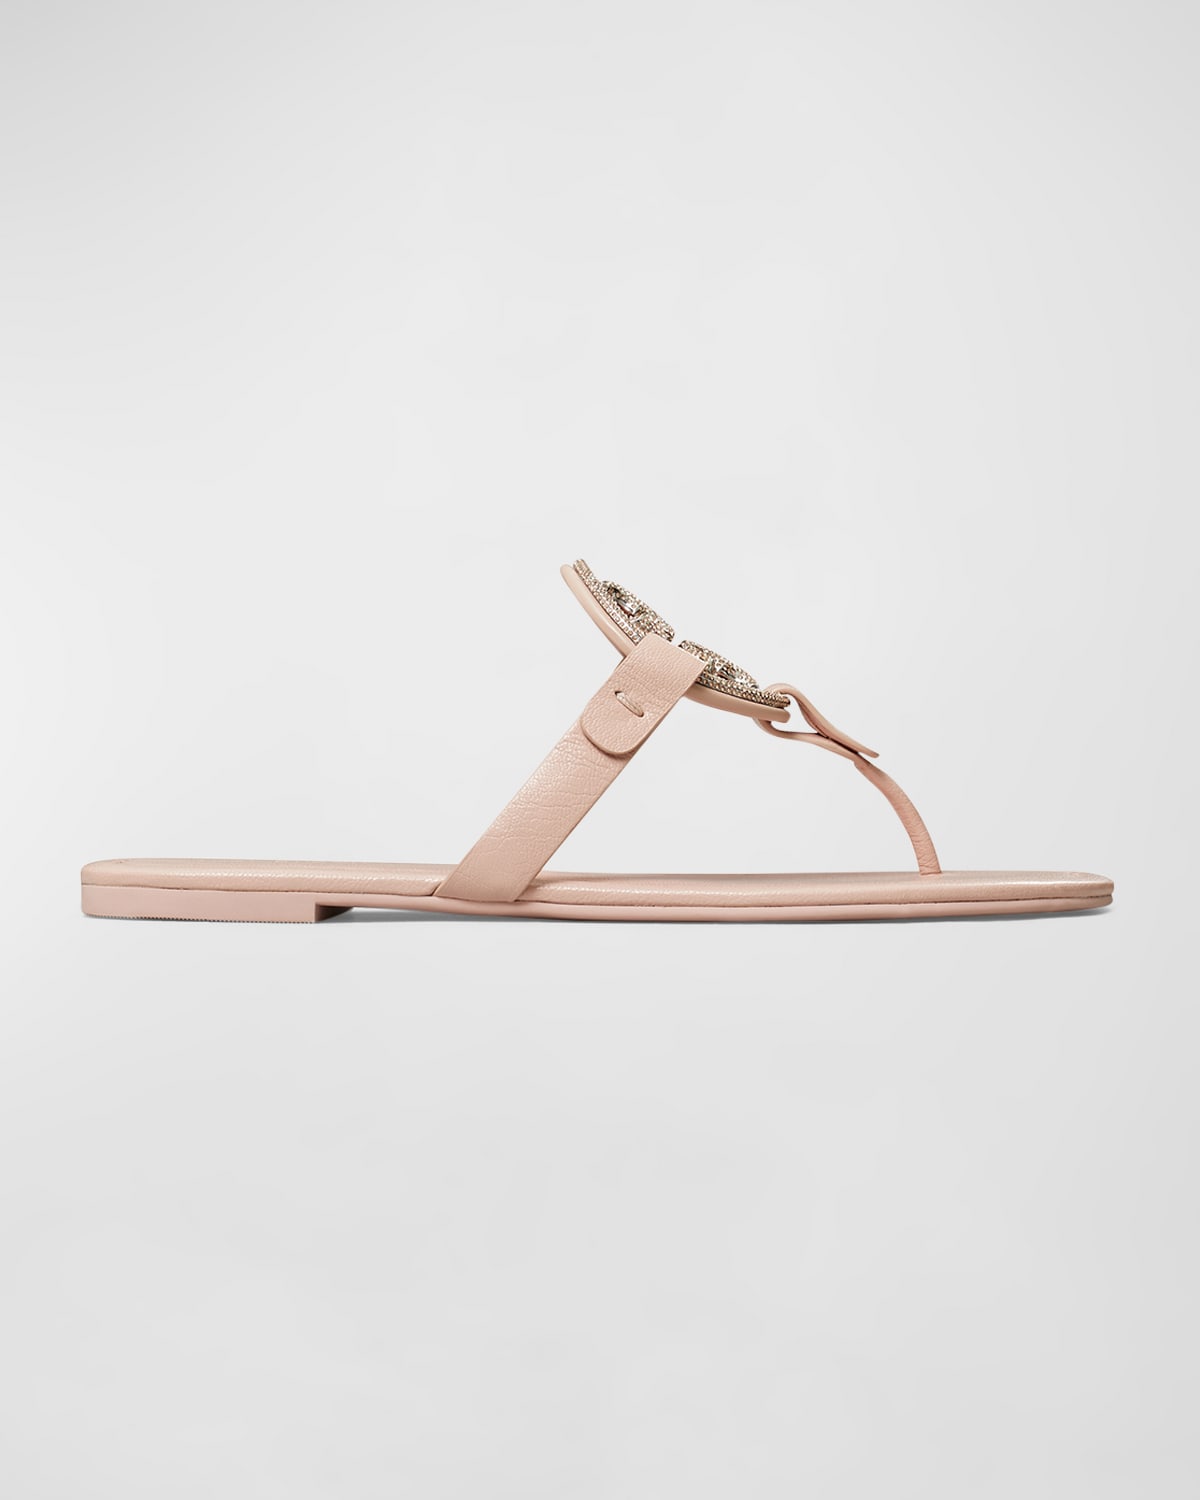 TORY BURCH MILLER PAVE MEDALLION THONG SANDALS